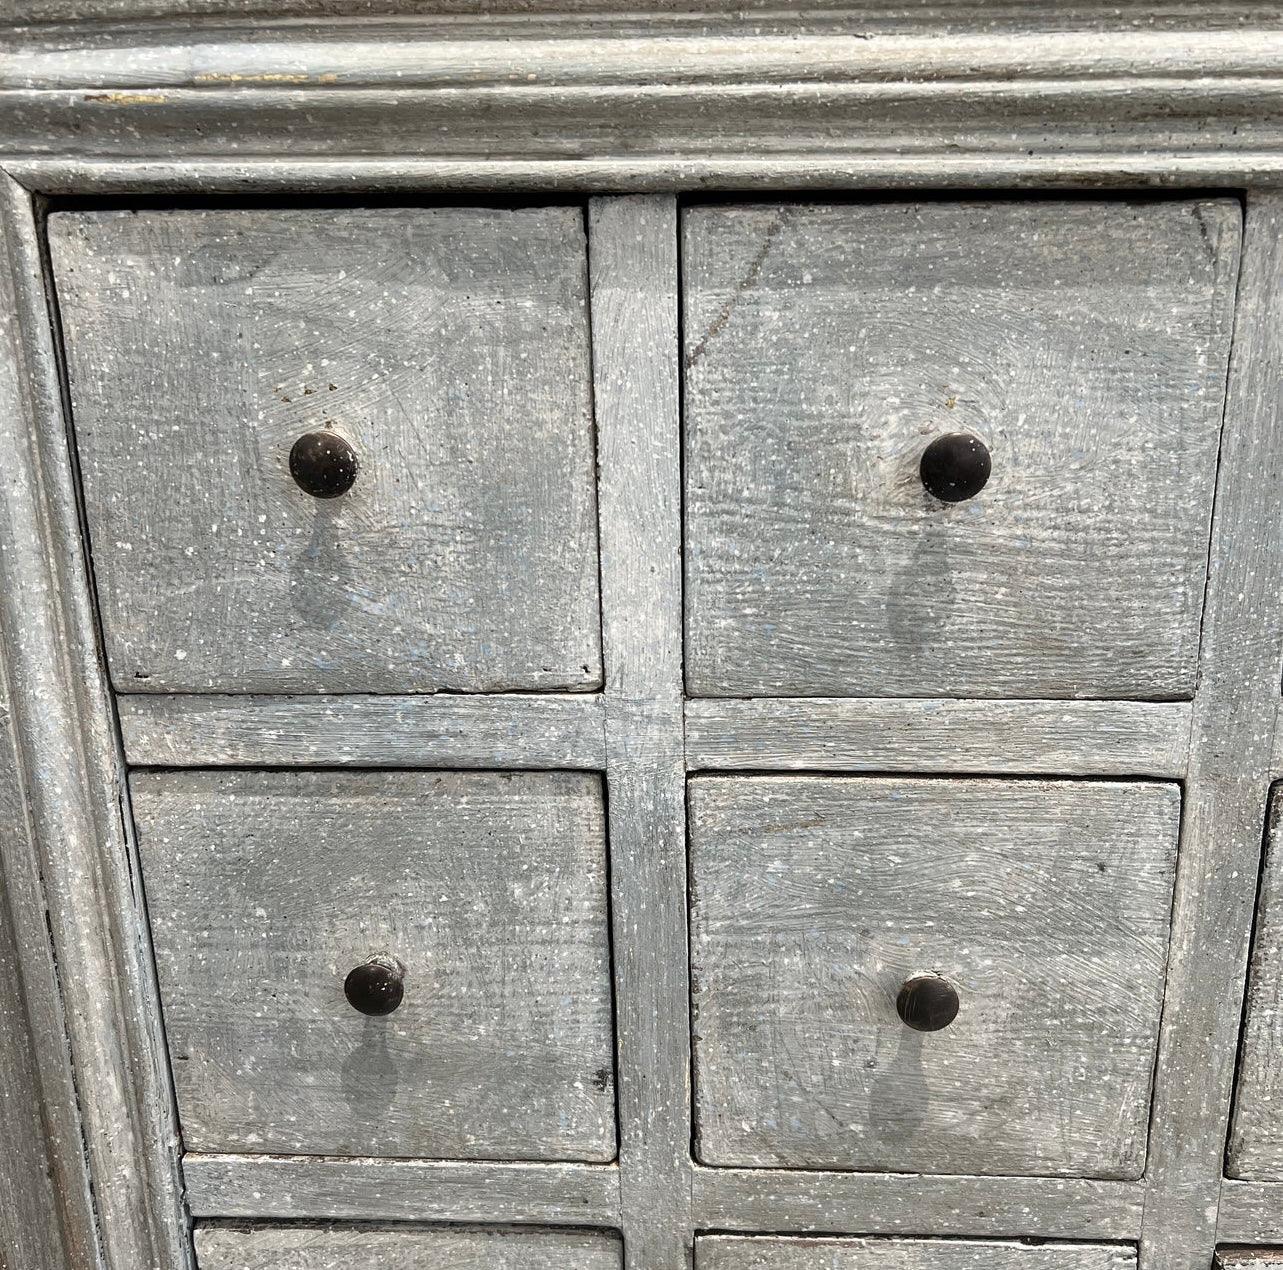 Blue Bank of Drawers - The White Barn Antiques